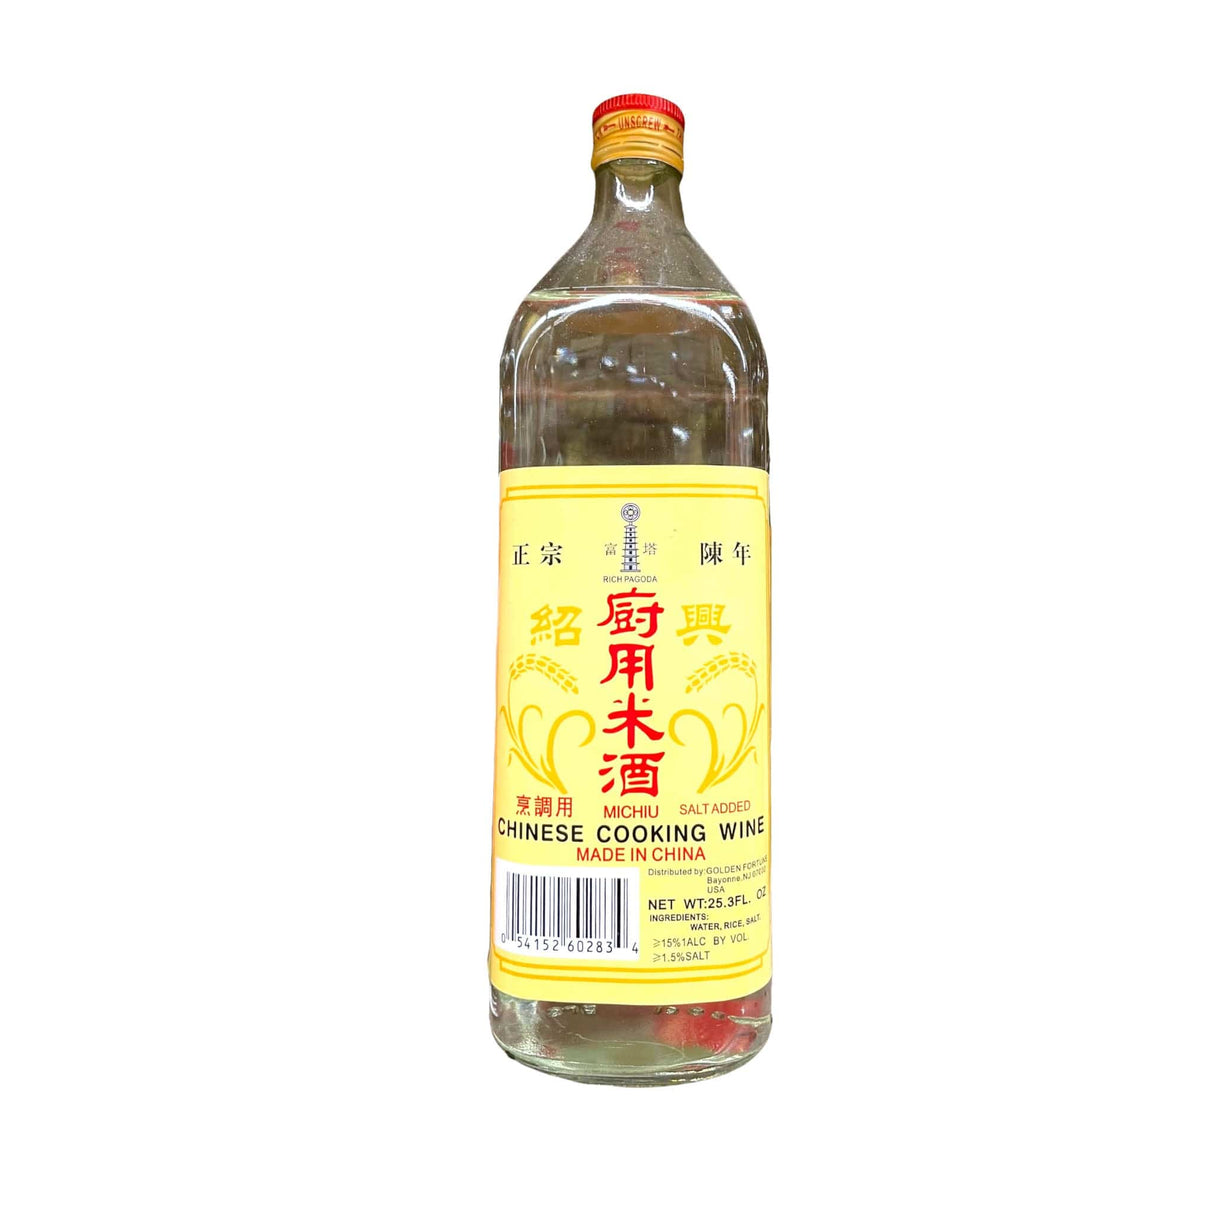 Rich Pagoda Chinese Cooking Wine